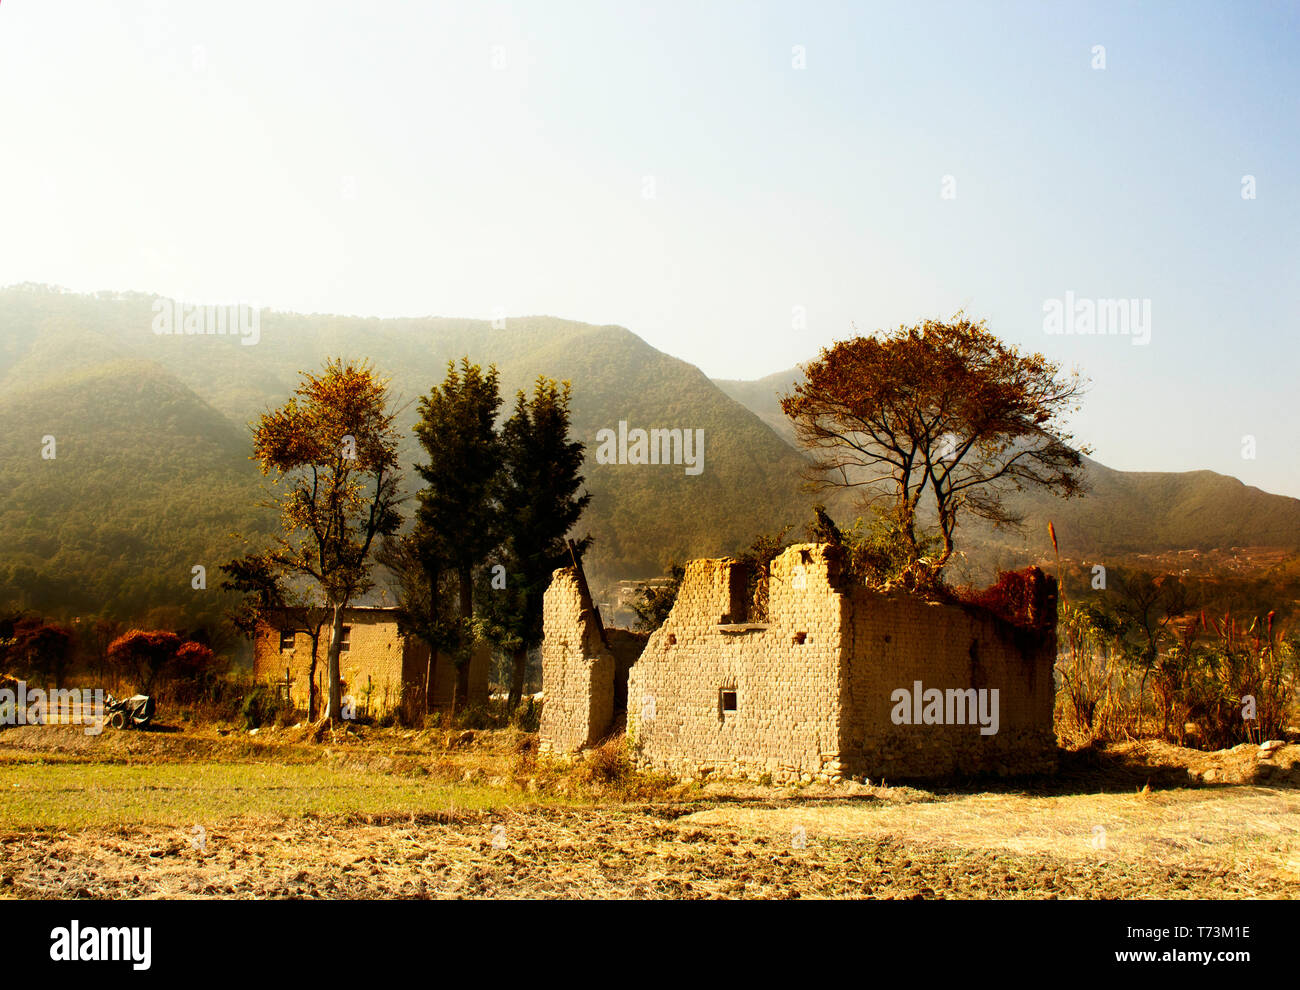 A damaged house and hills Stock Photo